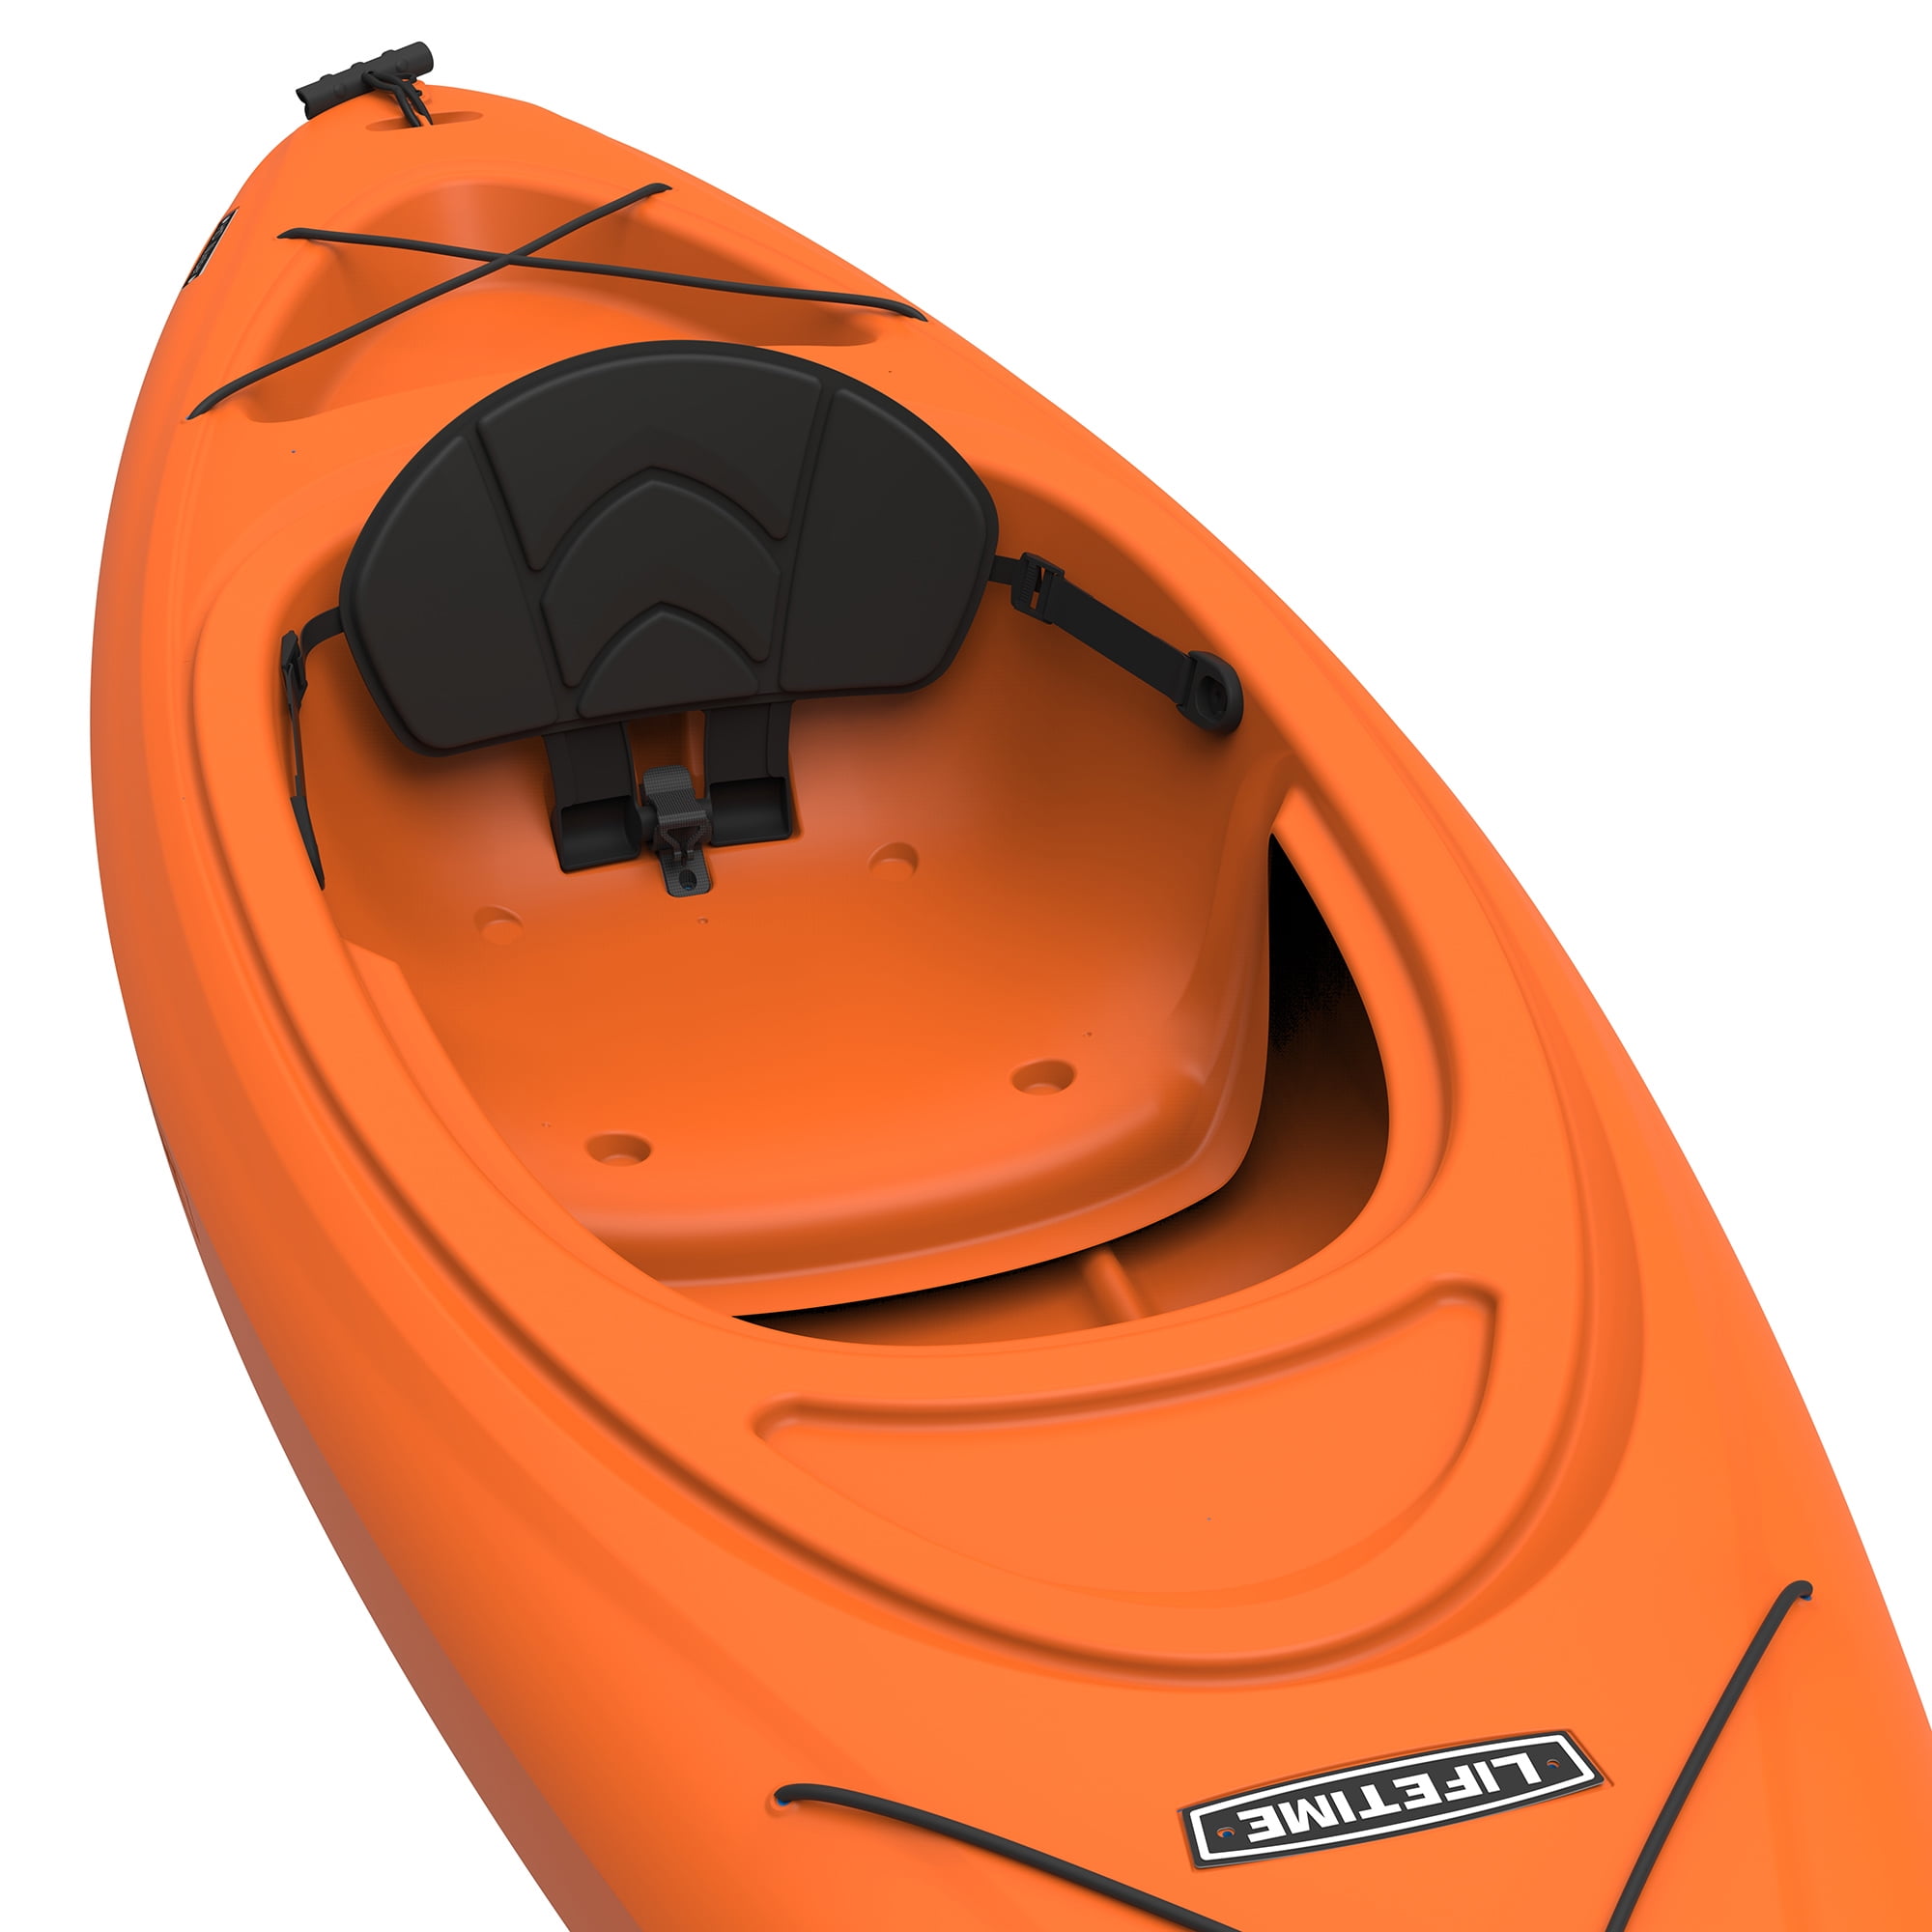 Lifetime Pacer 8 ft Sit-In Kayak (Paddle Included), Orange